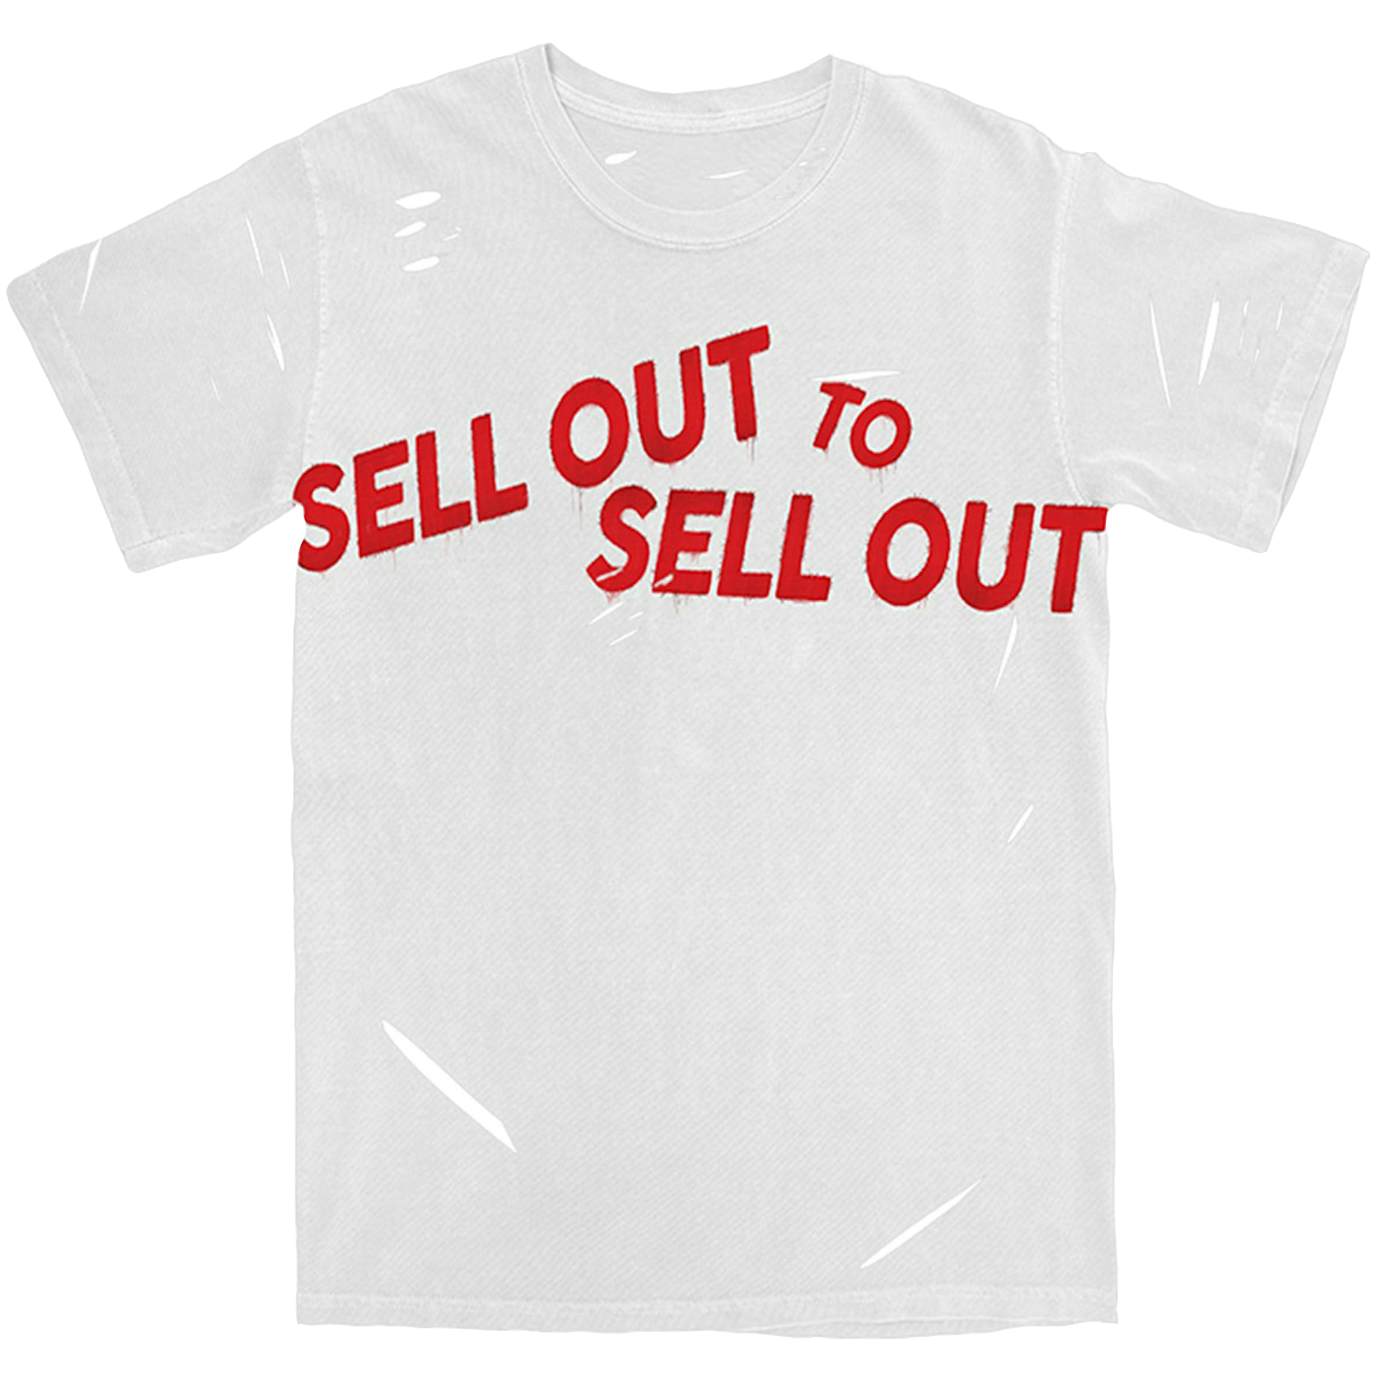 Miley Cyrus Sell Out to Sell Out Tee